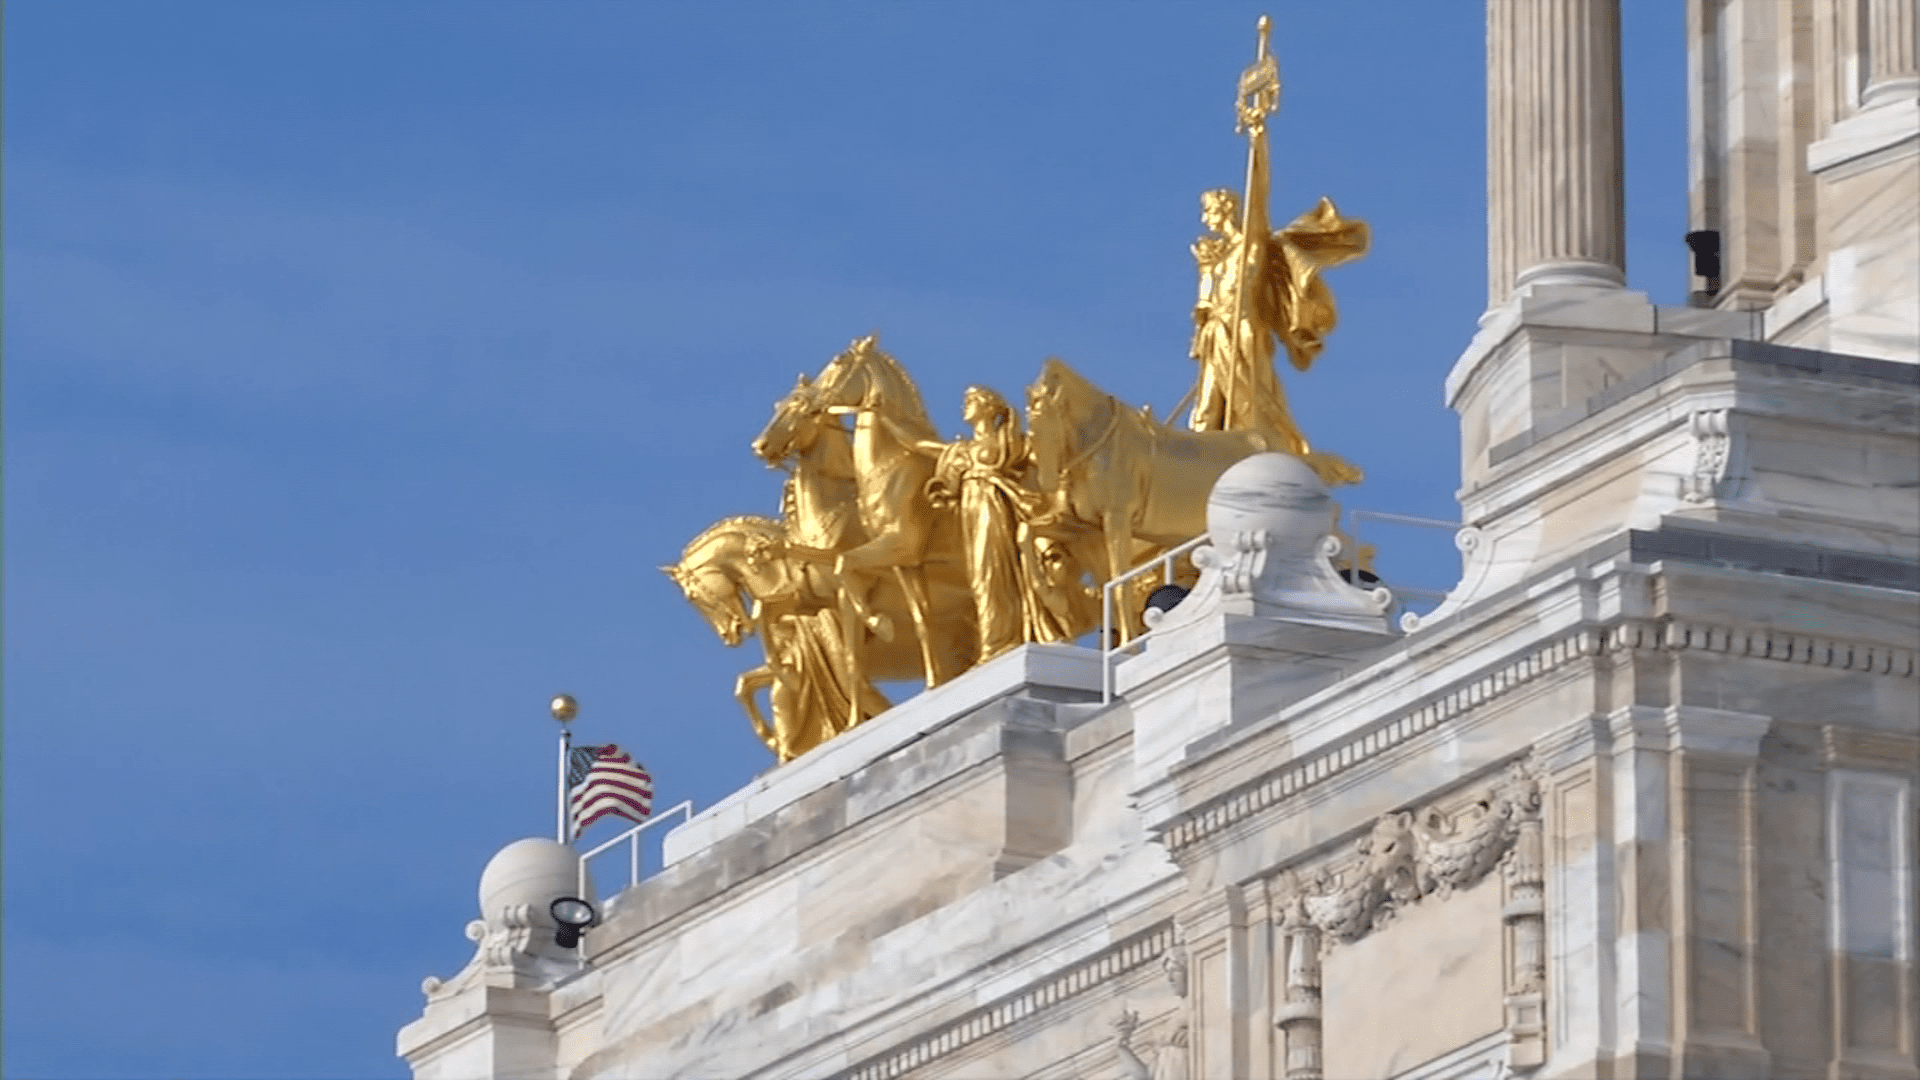 Gold statues on the MN capital building.